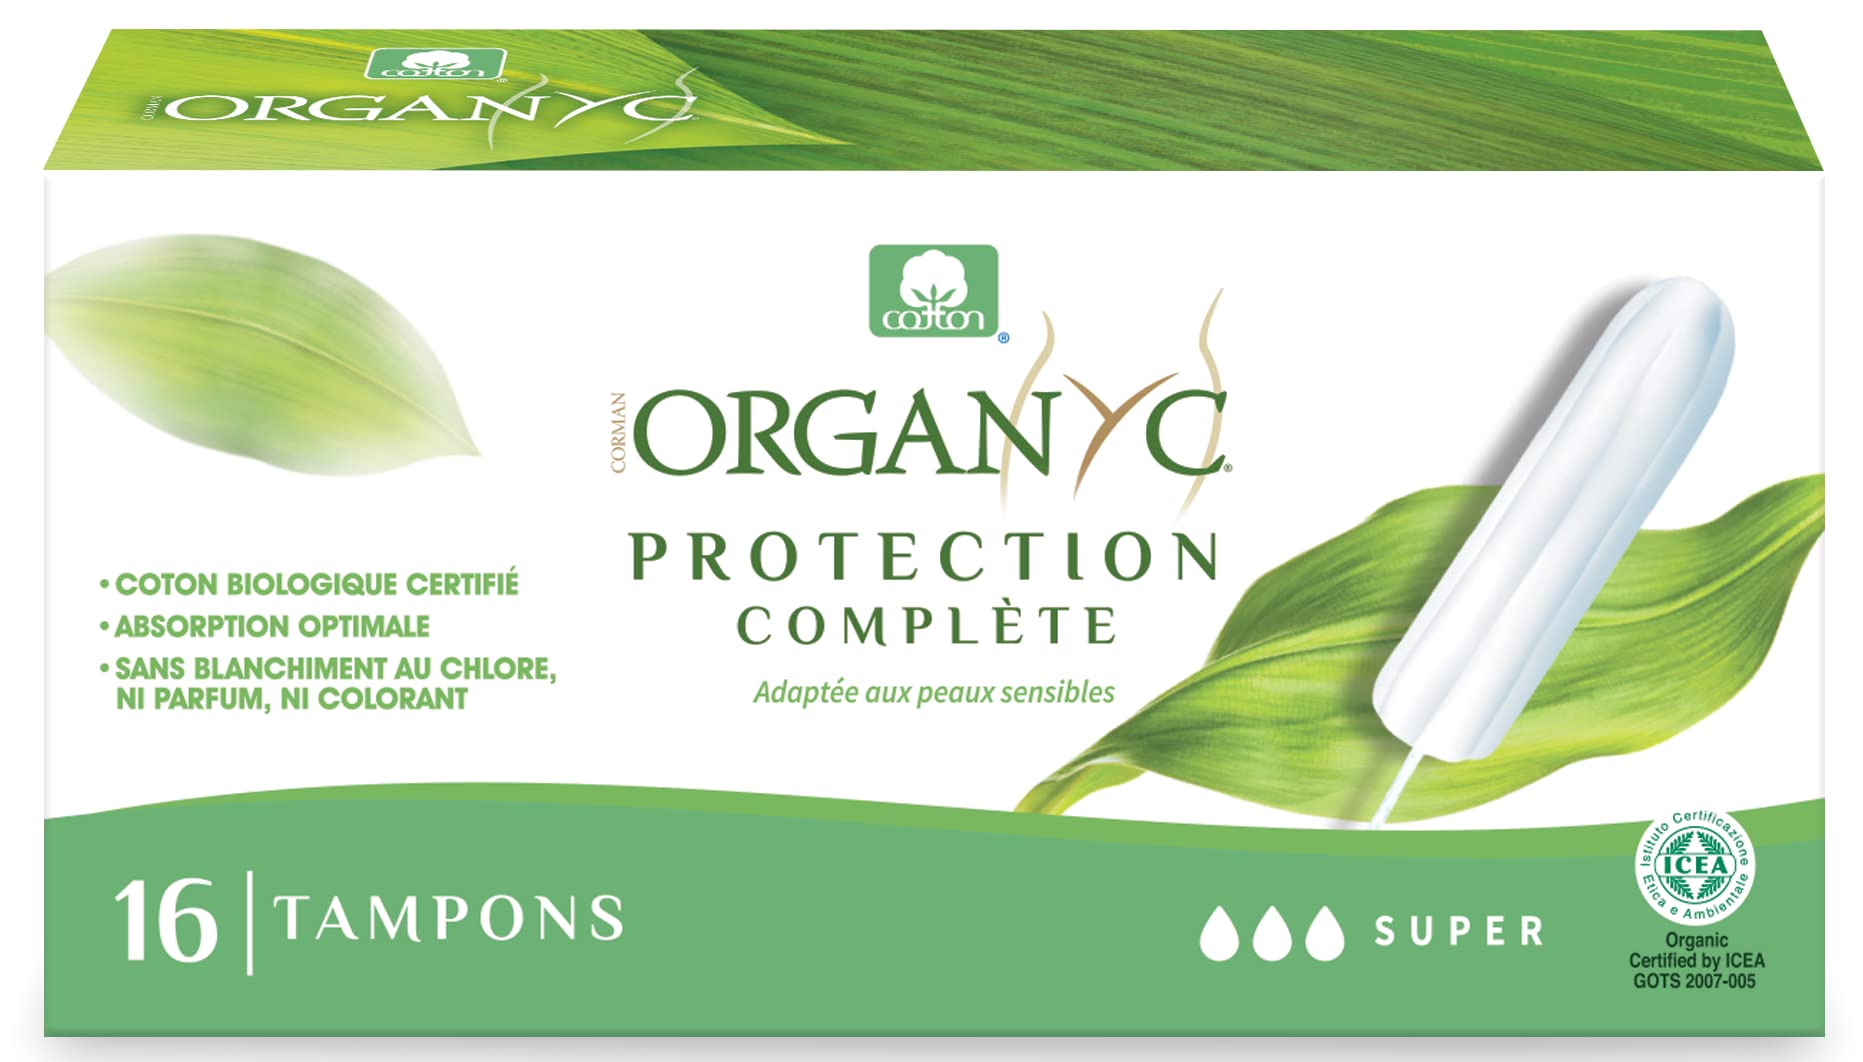 Organyc 100% Certified Organic Cotton Panty Liner, 24 Count